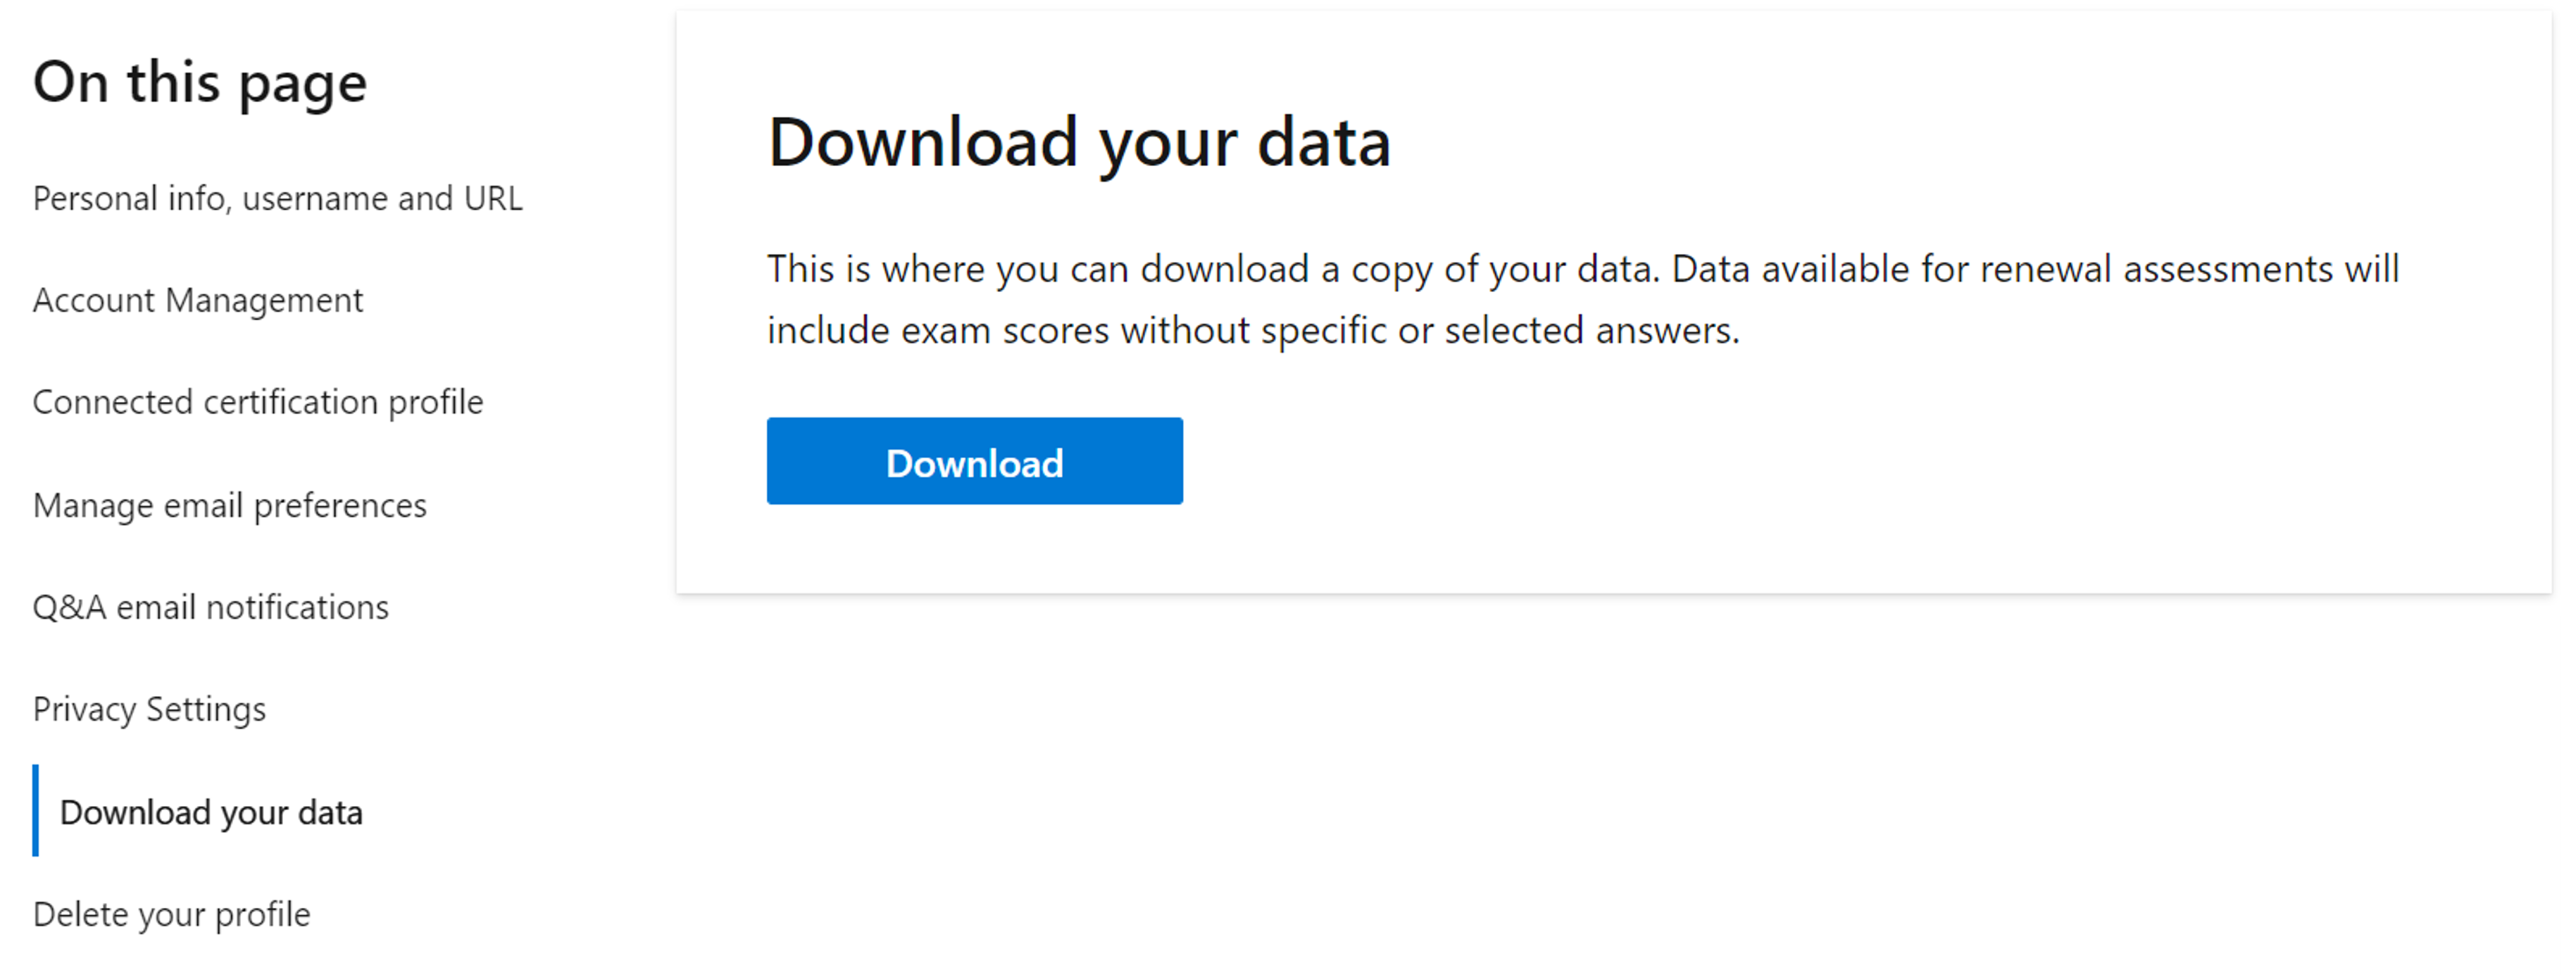 Screenshot of the Download your data section in the Microsoft Learn profile settings.